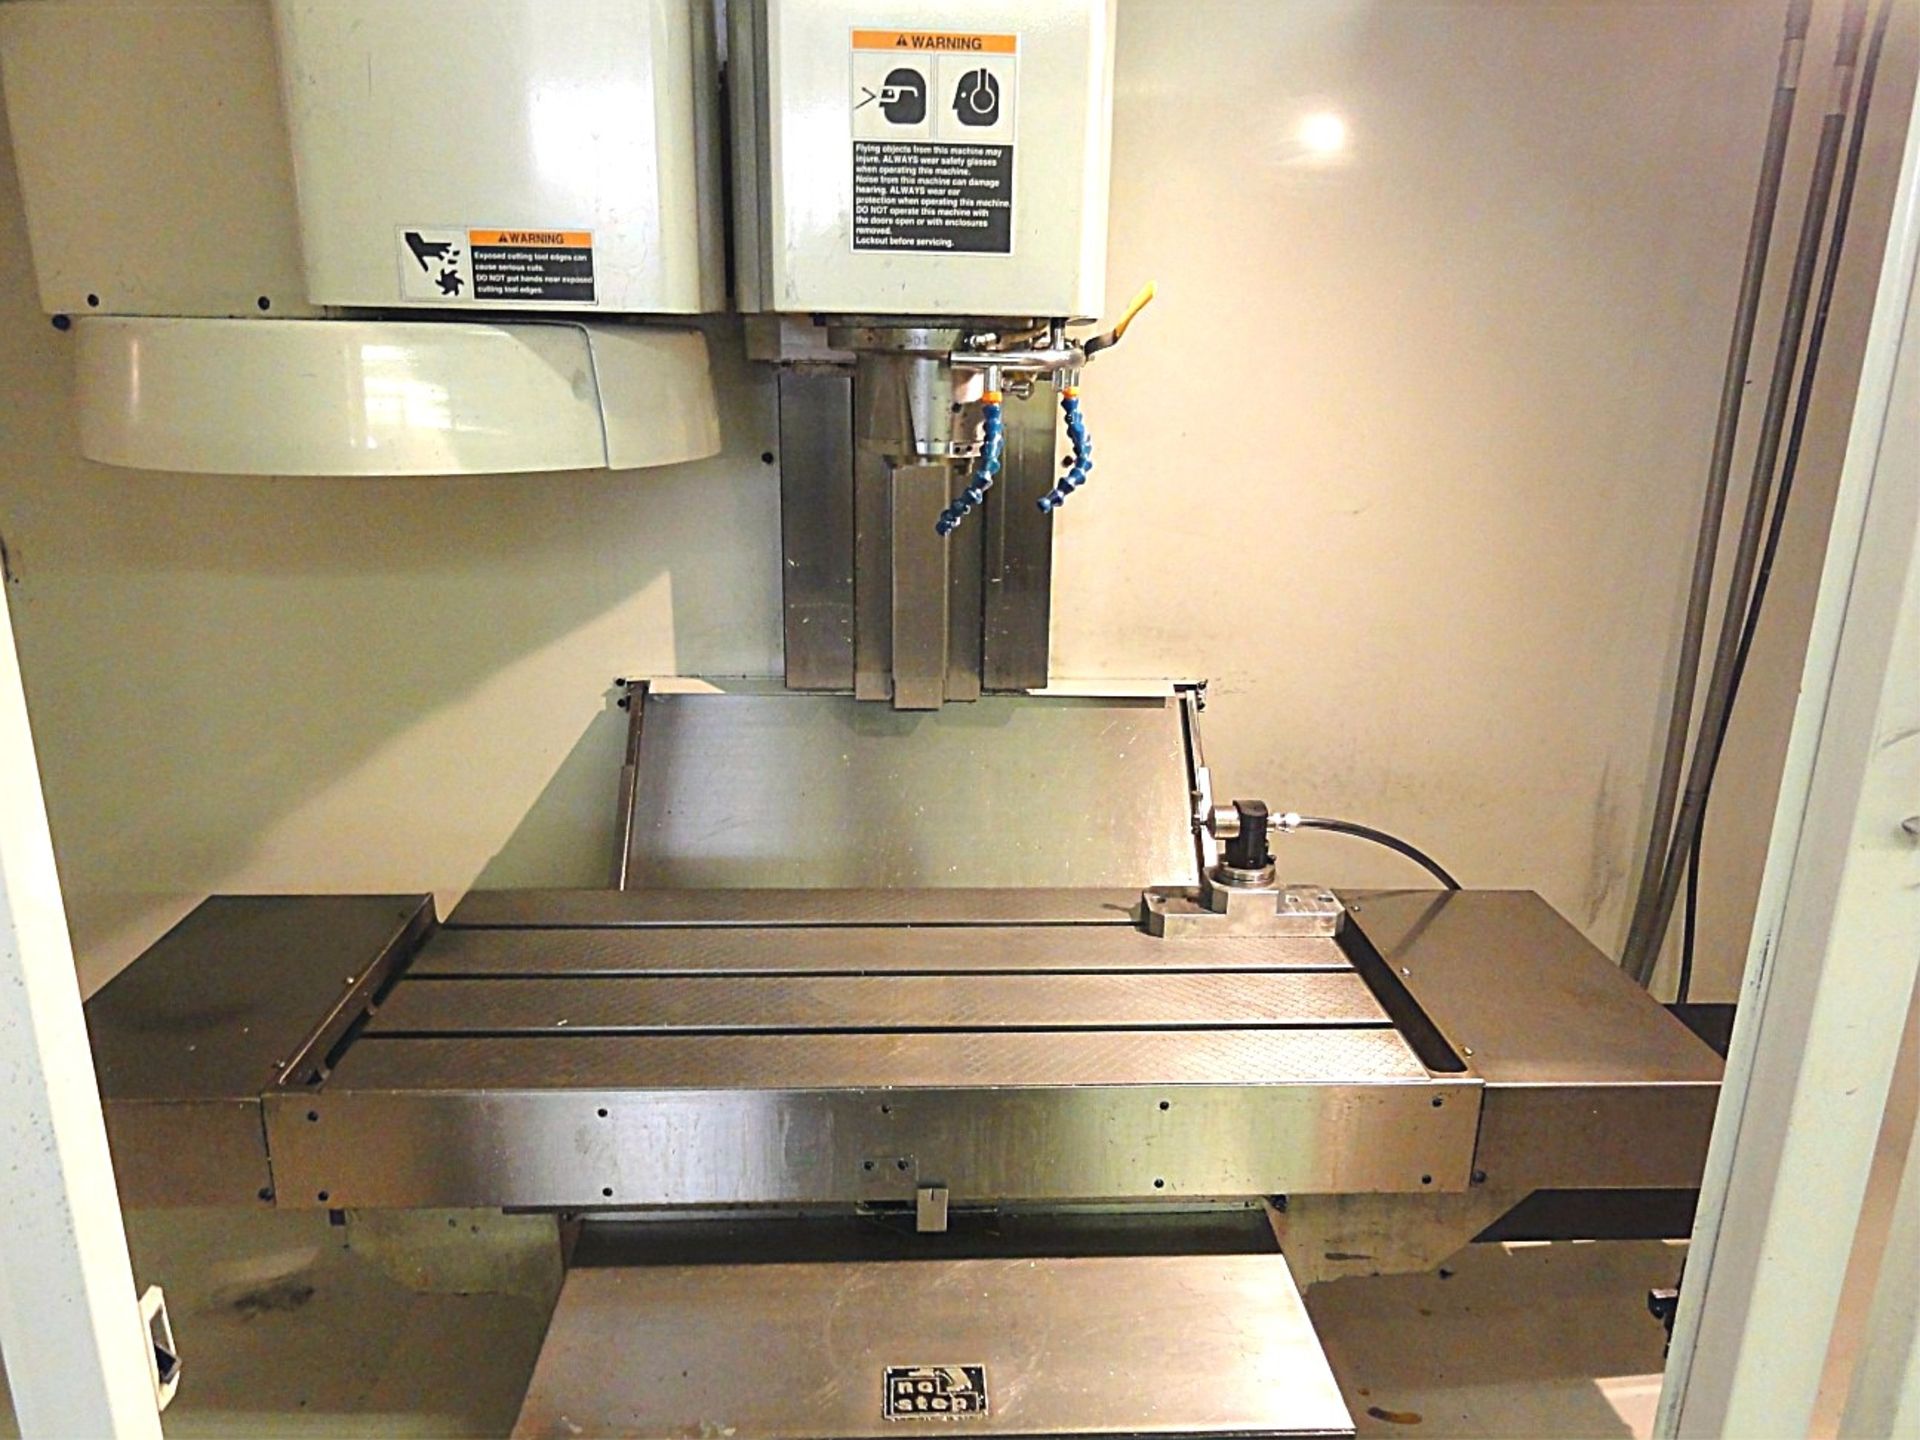 1997 Fadal VMC, Mdl 2216HT, 39” x 16” Table, X= 22”, Y= 16”, Z= 20”, - Image 2 of 13